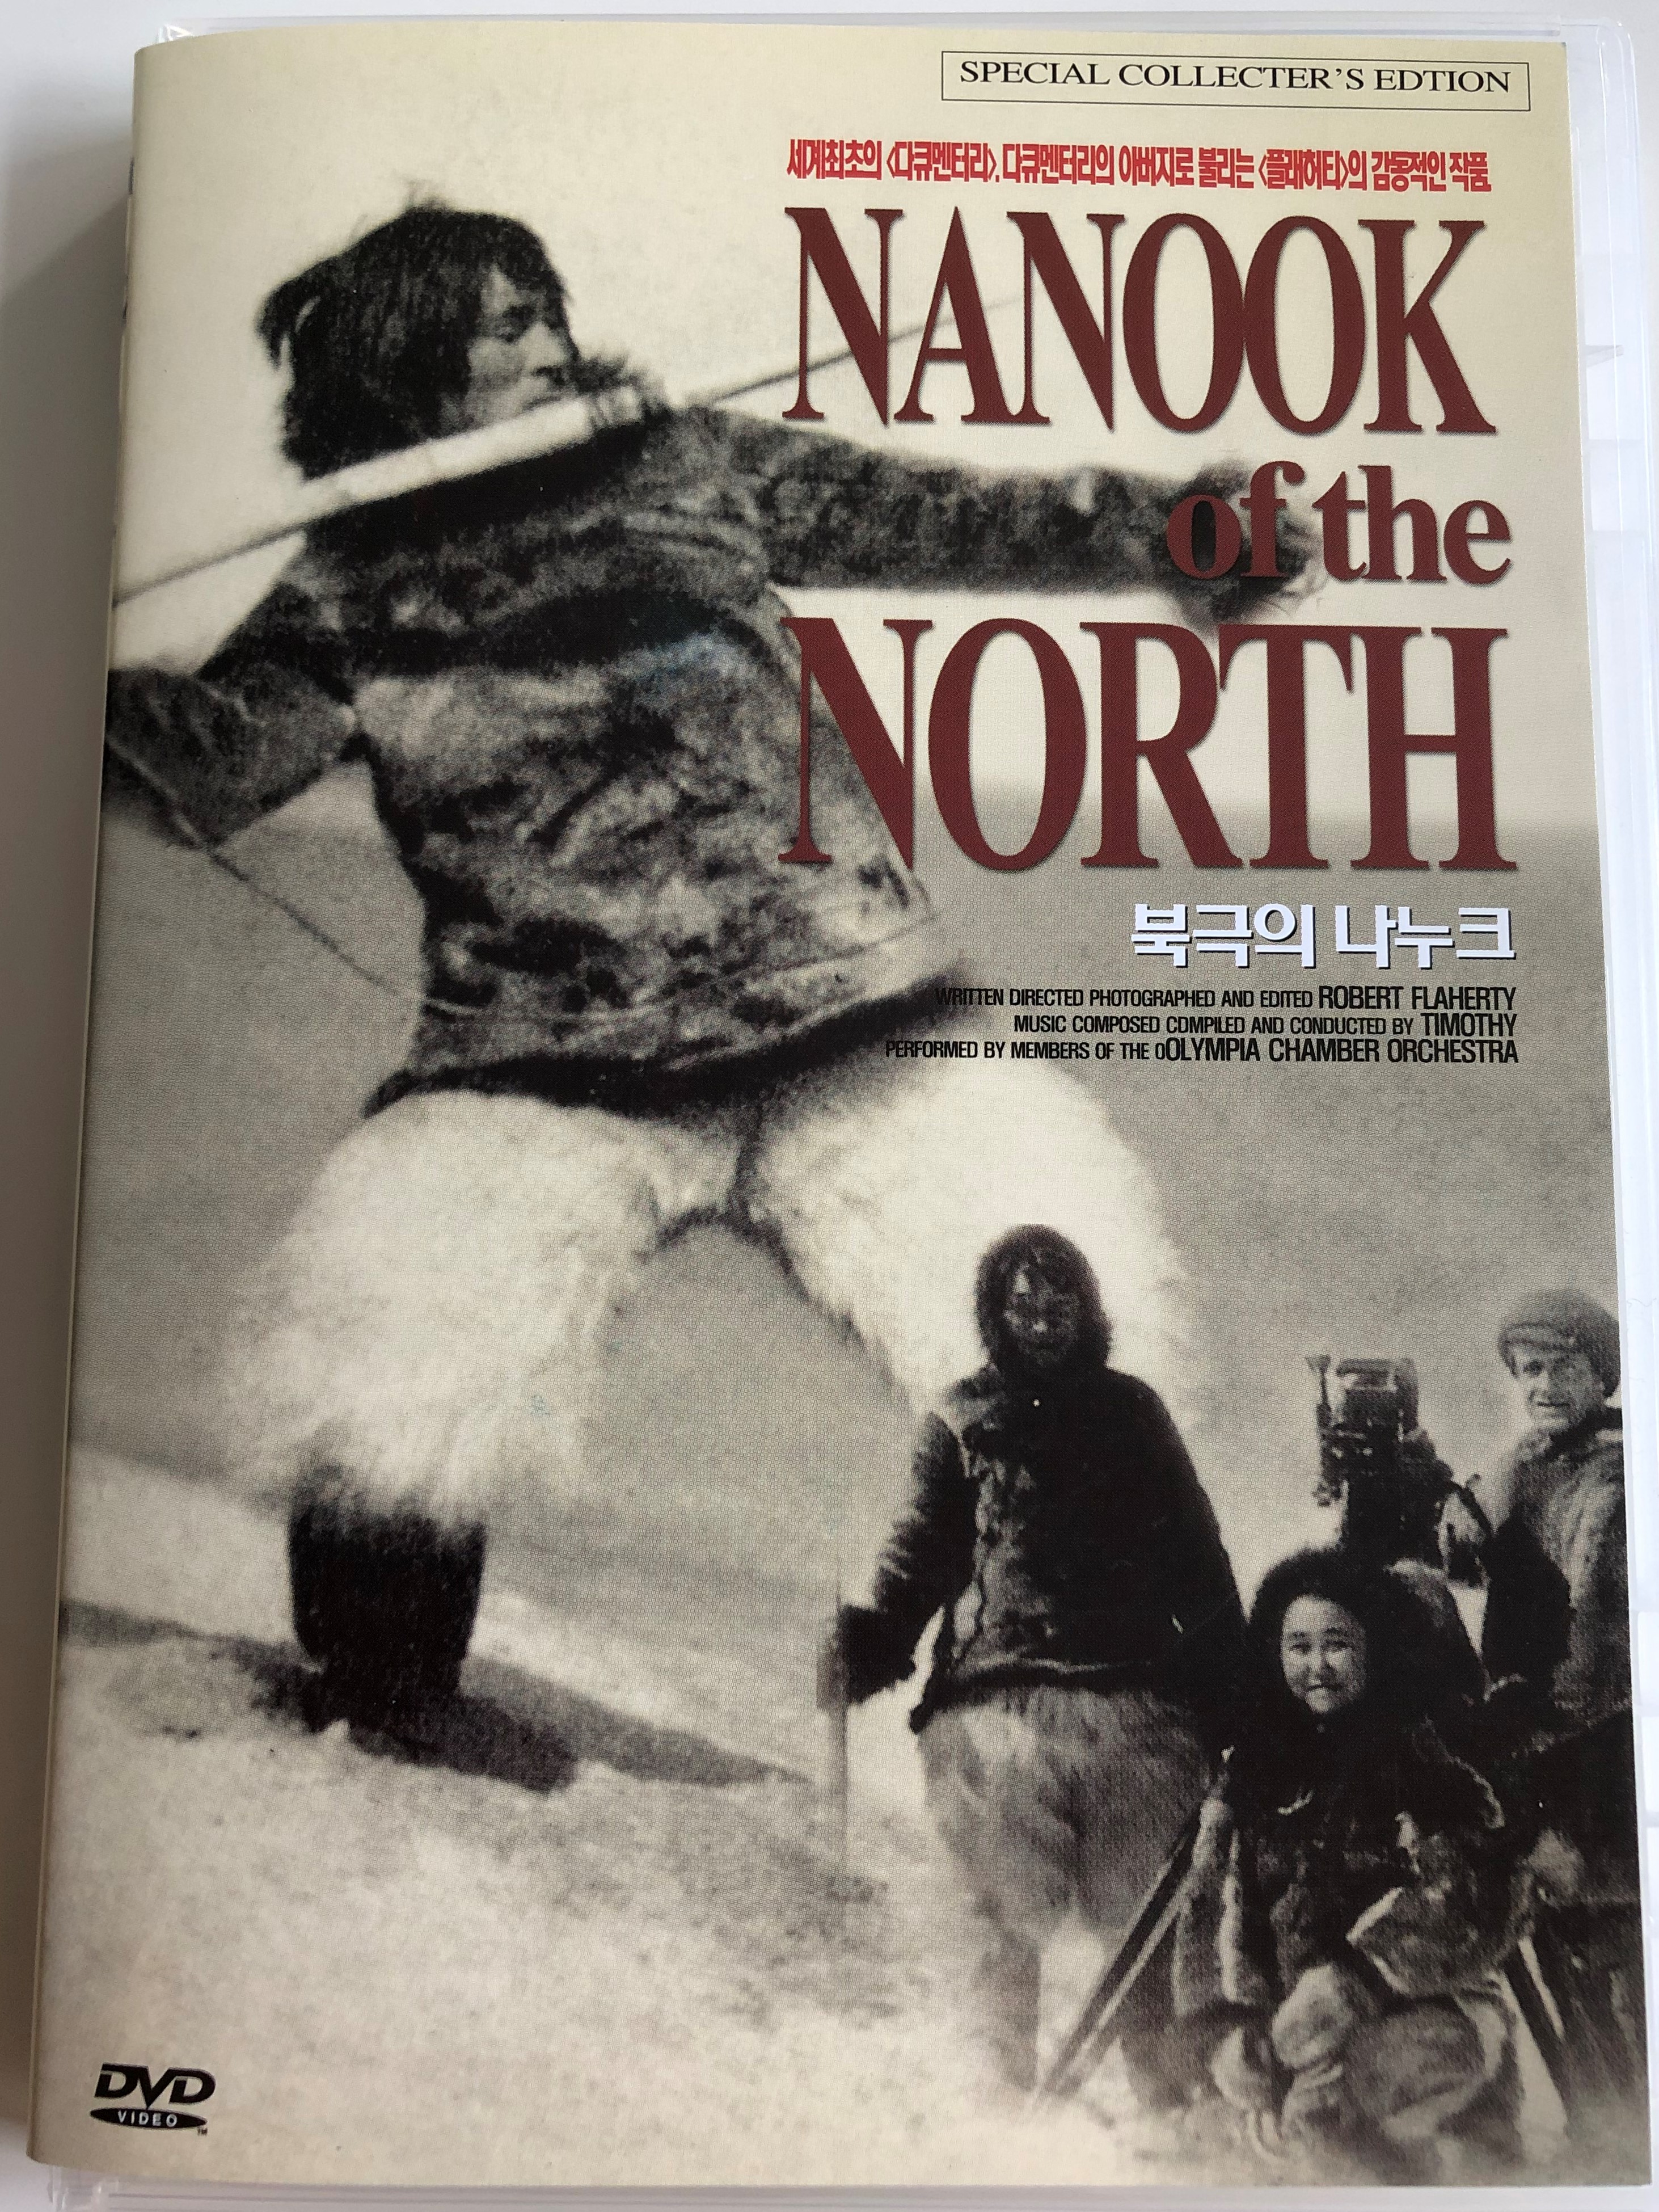 nanook-on-the-north-dvd-2004-written-and-directed-by-robert-flaherty-olympia-chamber-orchestra-docudrama-special-collector-s-edition-1-.jpg